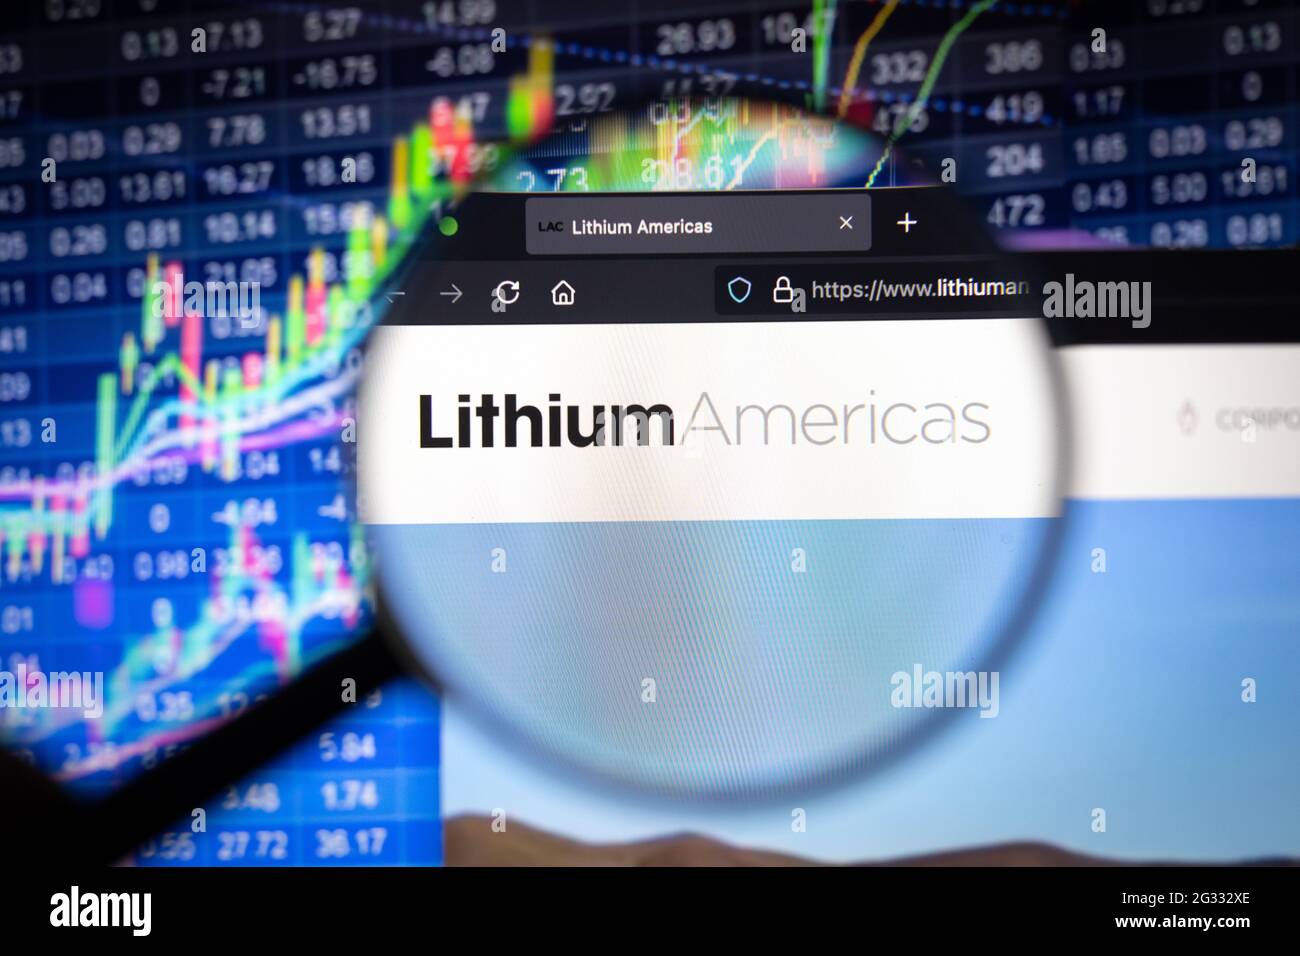 Lithium Americas Corp. company logo on a website with blurry stock market developments in the background, seen on a computer screen Stock Photo